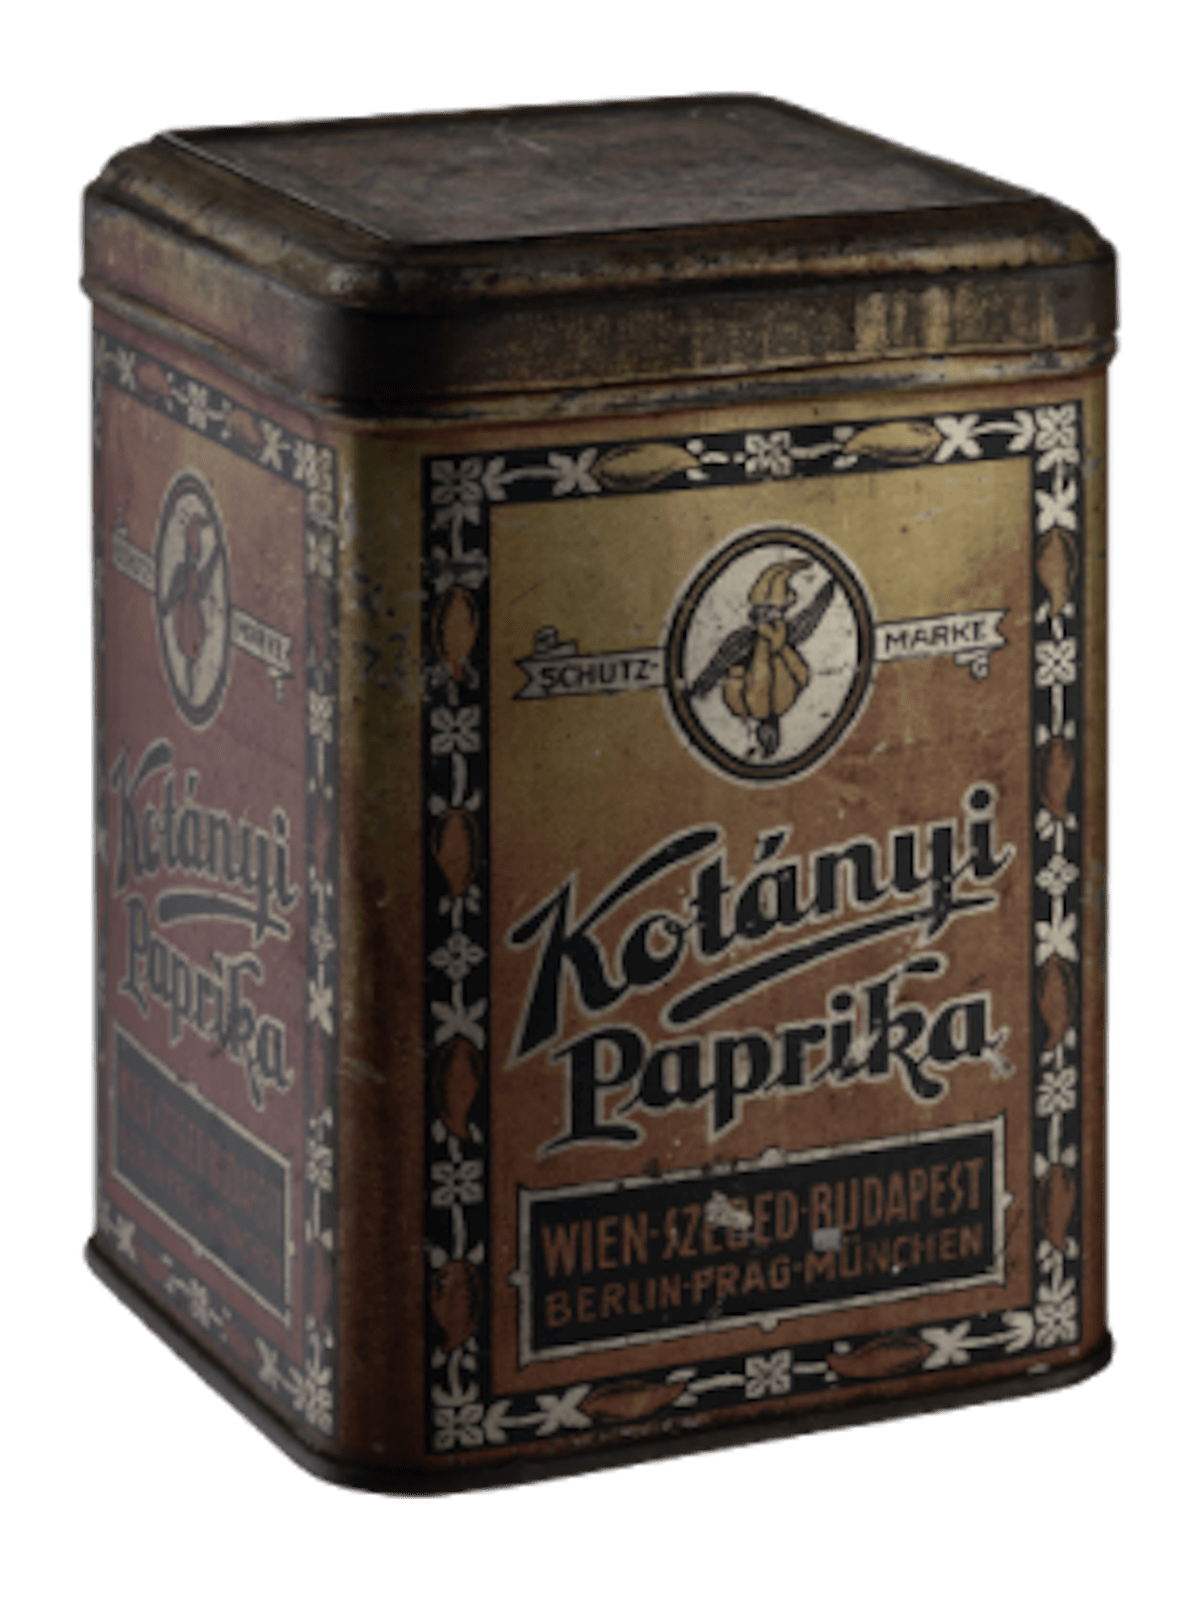 Kotányi spice packaging from 1896.